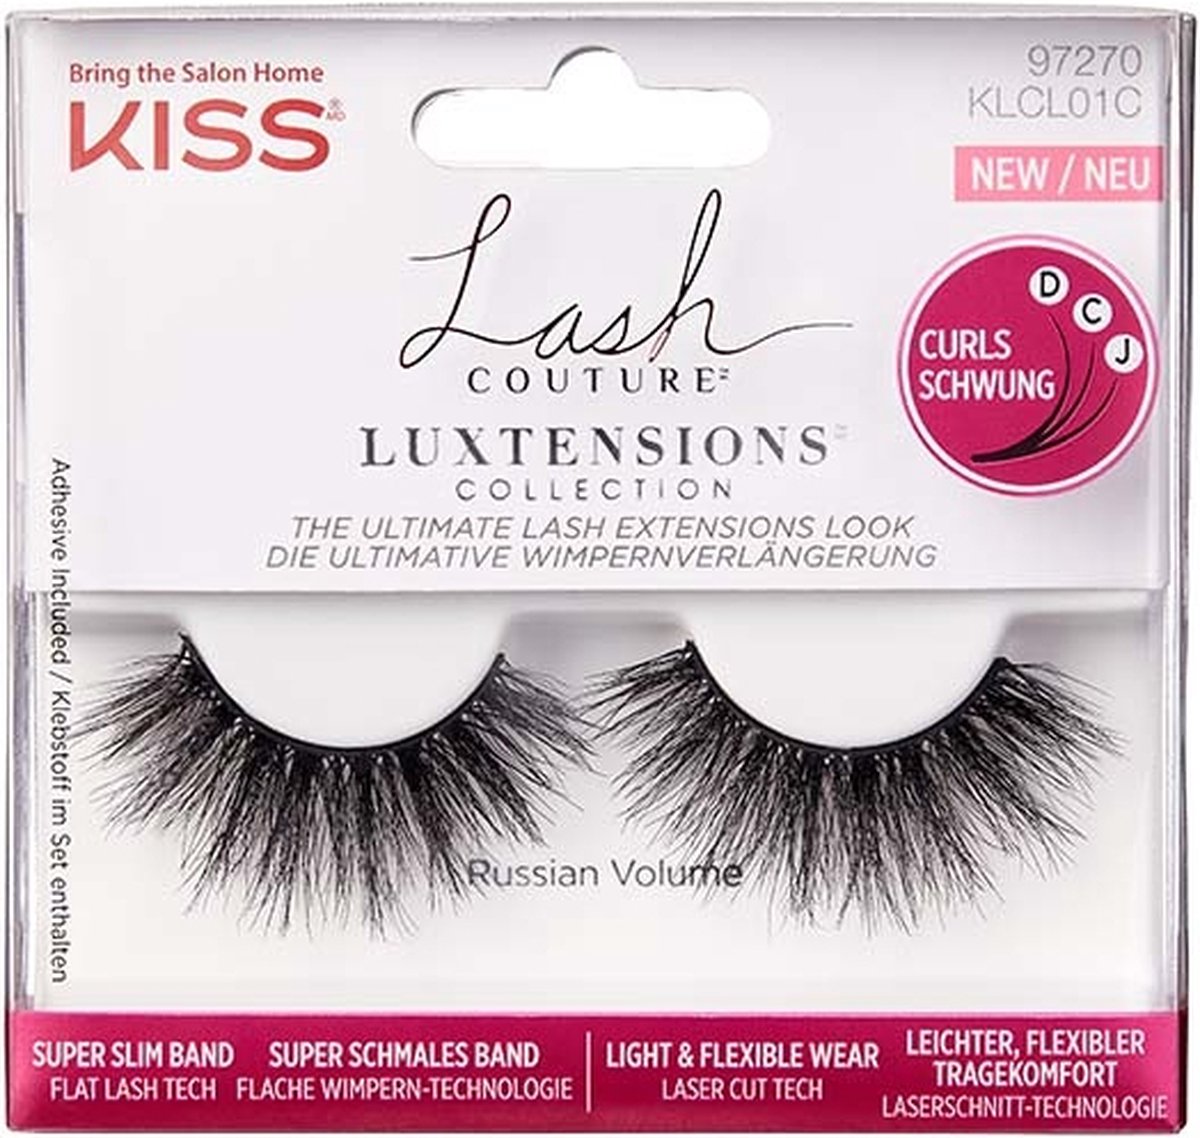 Kiss Wimpers Lash Couture LuXtensions - Wimperextensions - Lashes - Nep Wimpers - Russian Volume